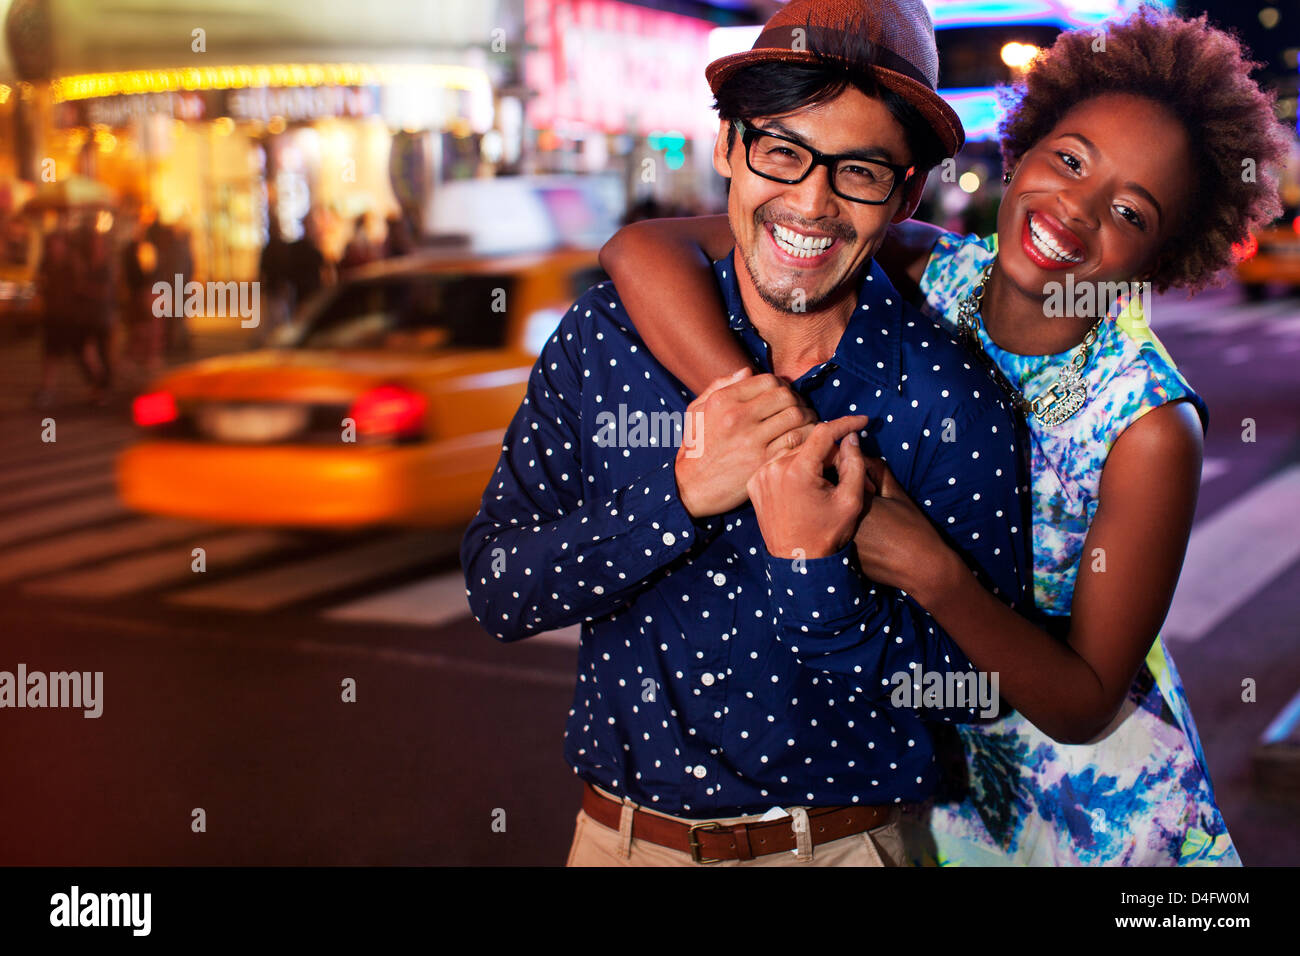 Couple smiling on city street at night Banque D'Images